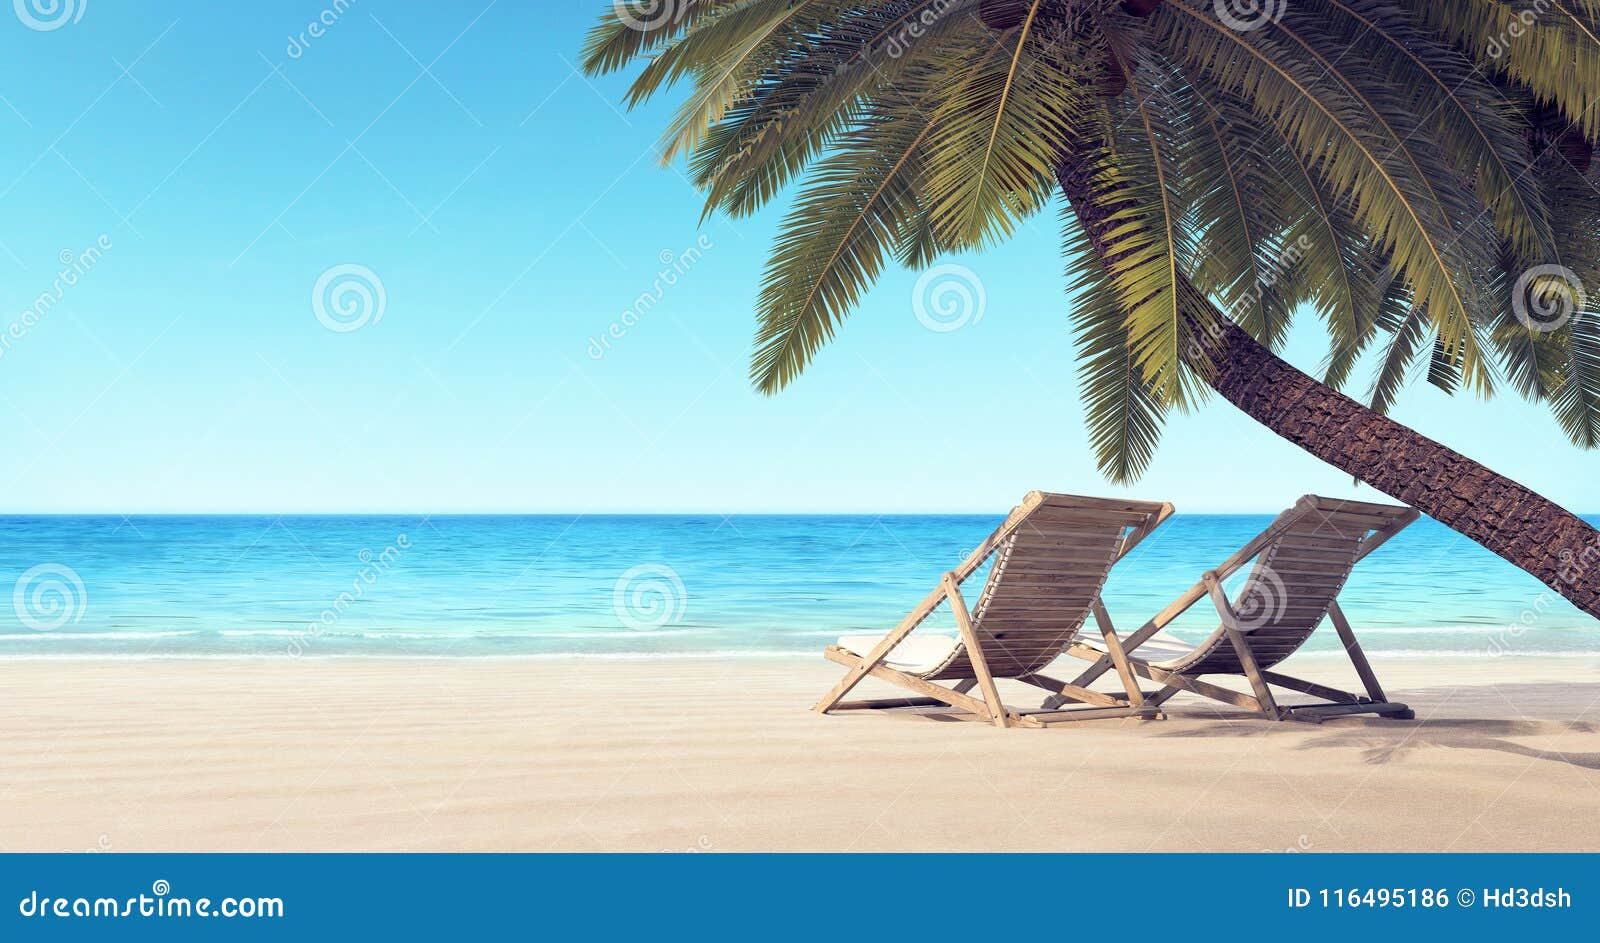 two chairs on the beach under palm tree summer background